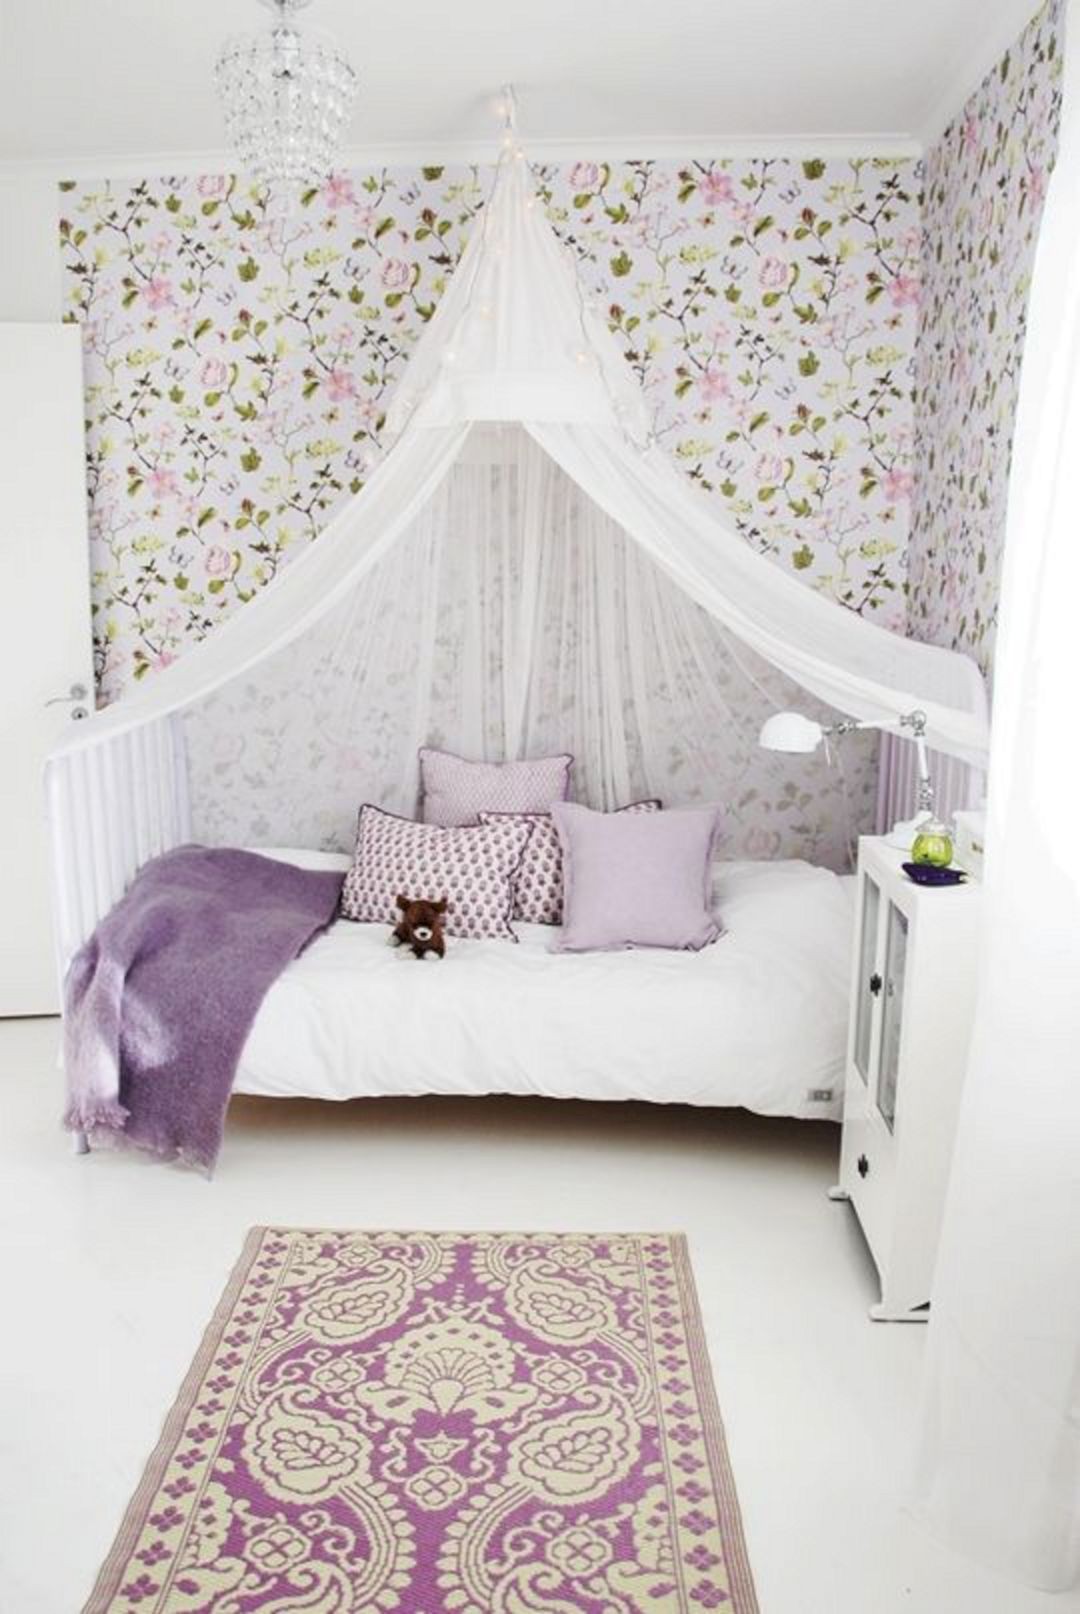 little-girls-room-canopy-bed-22-1533698612958644074703